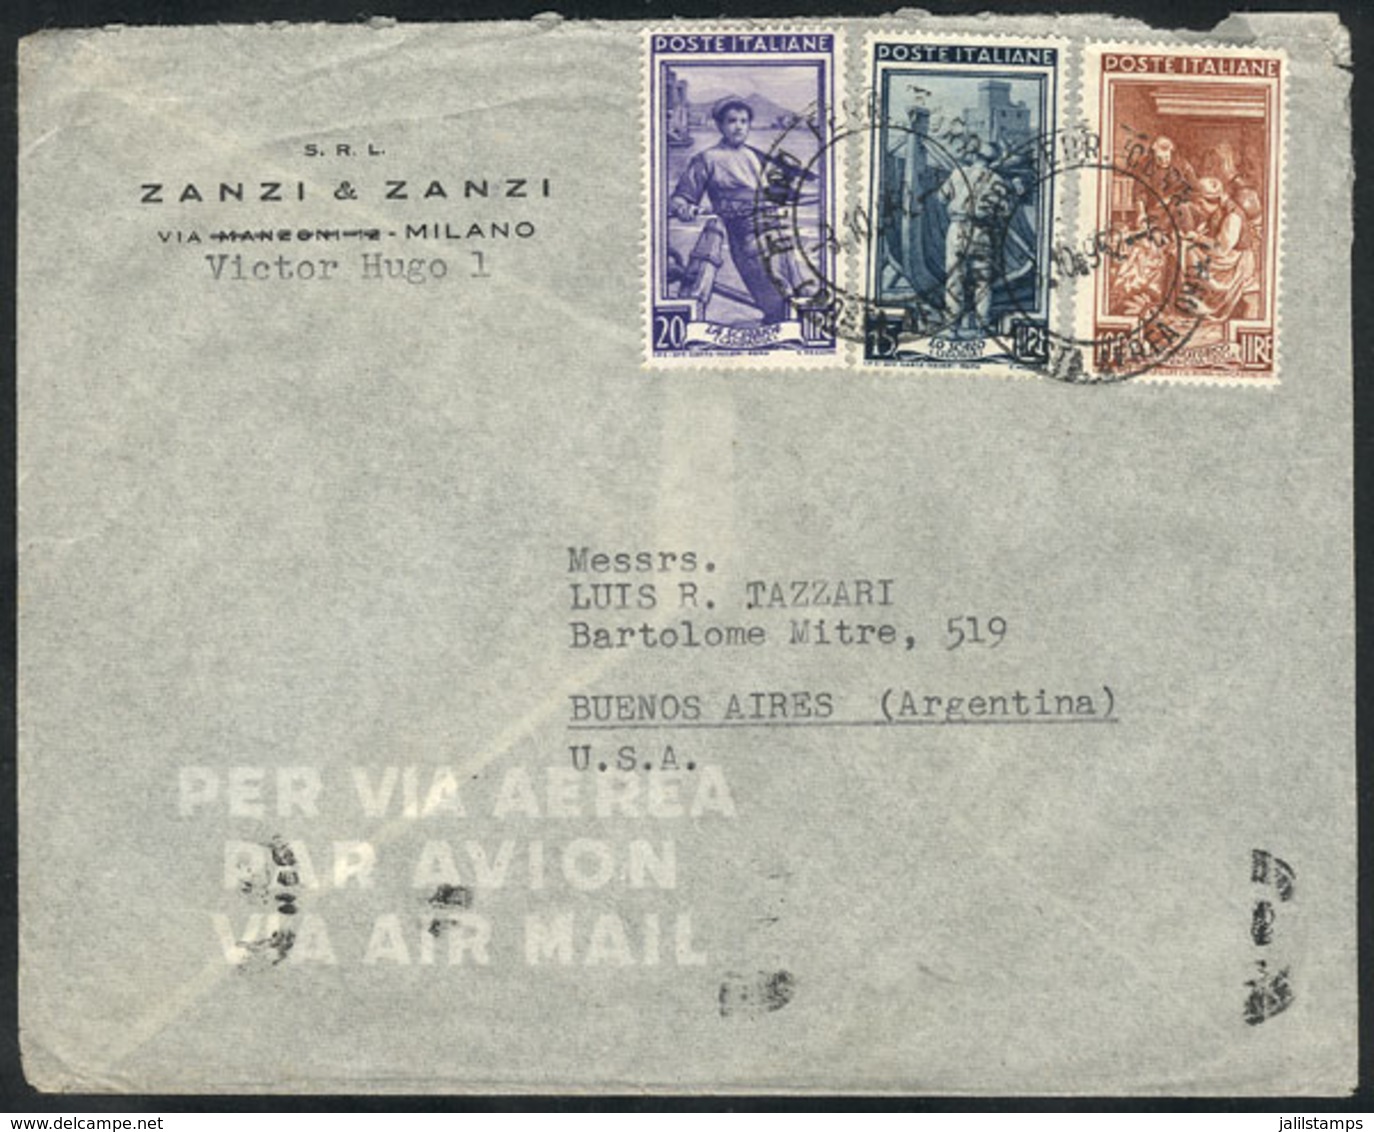 ITALY: Airmail Cover Franked With 135L., Sent From Milano To Argentina On 9/OC/1952, VF Quality! - Non Classificati